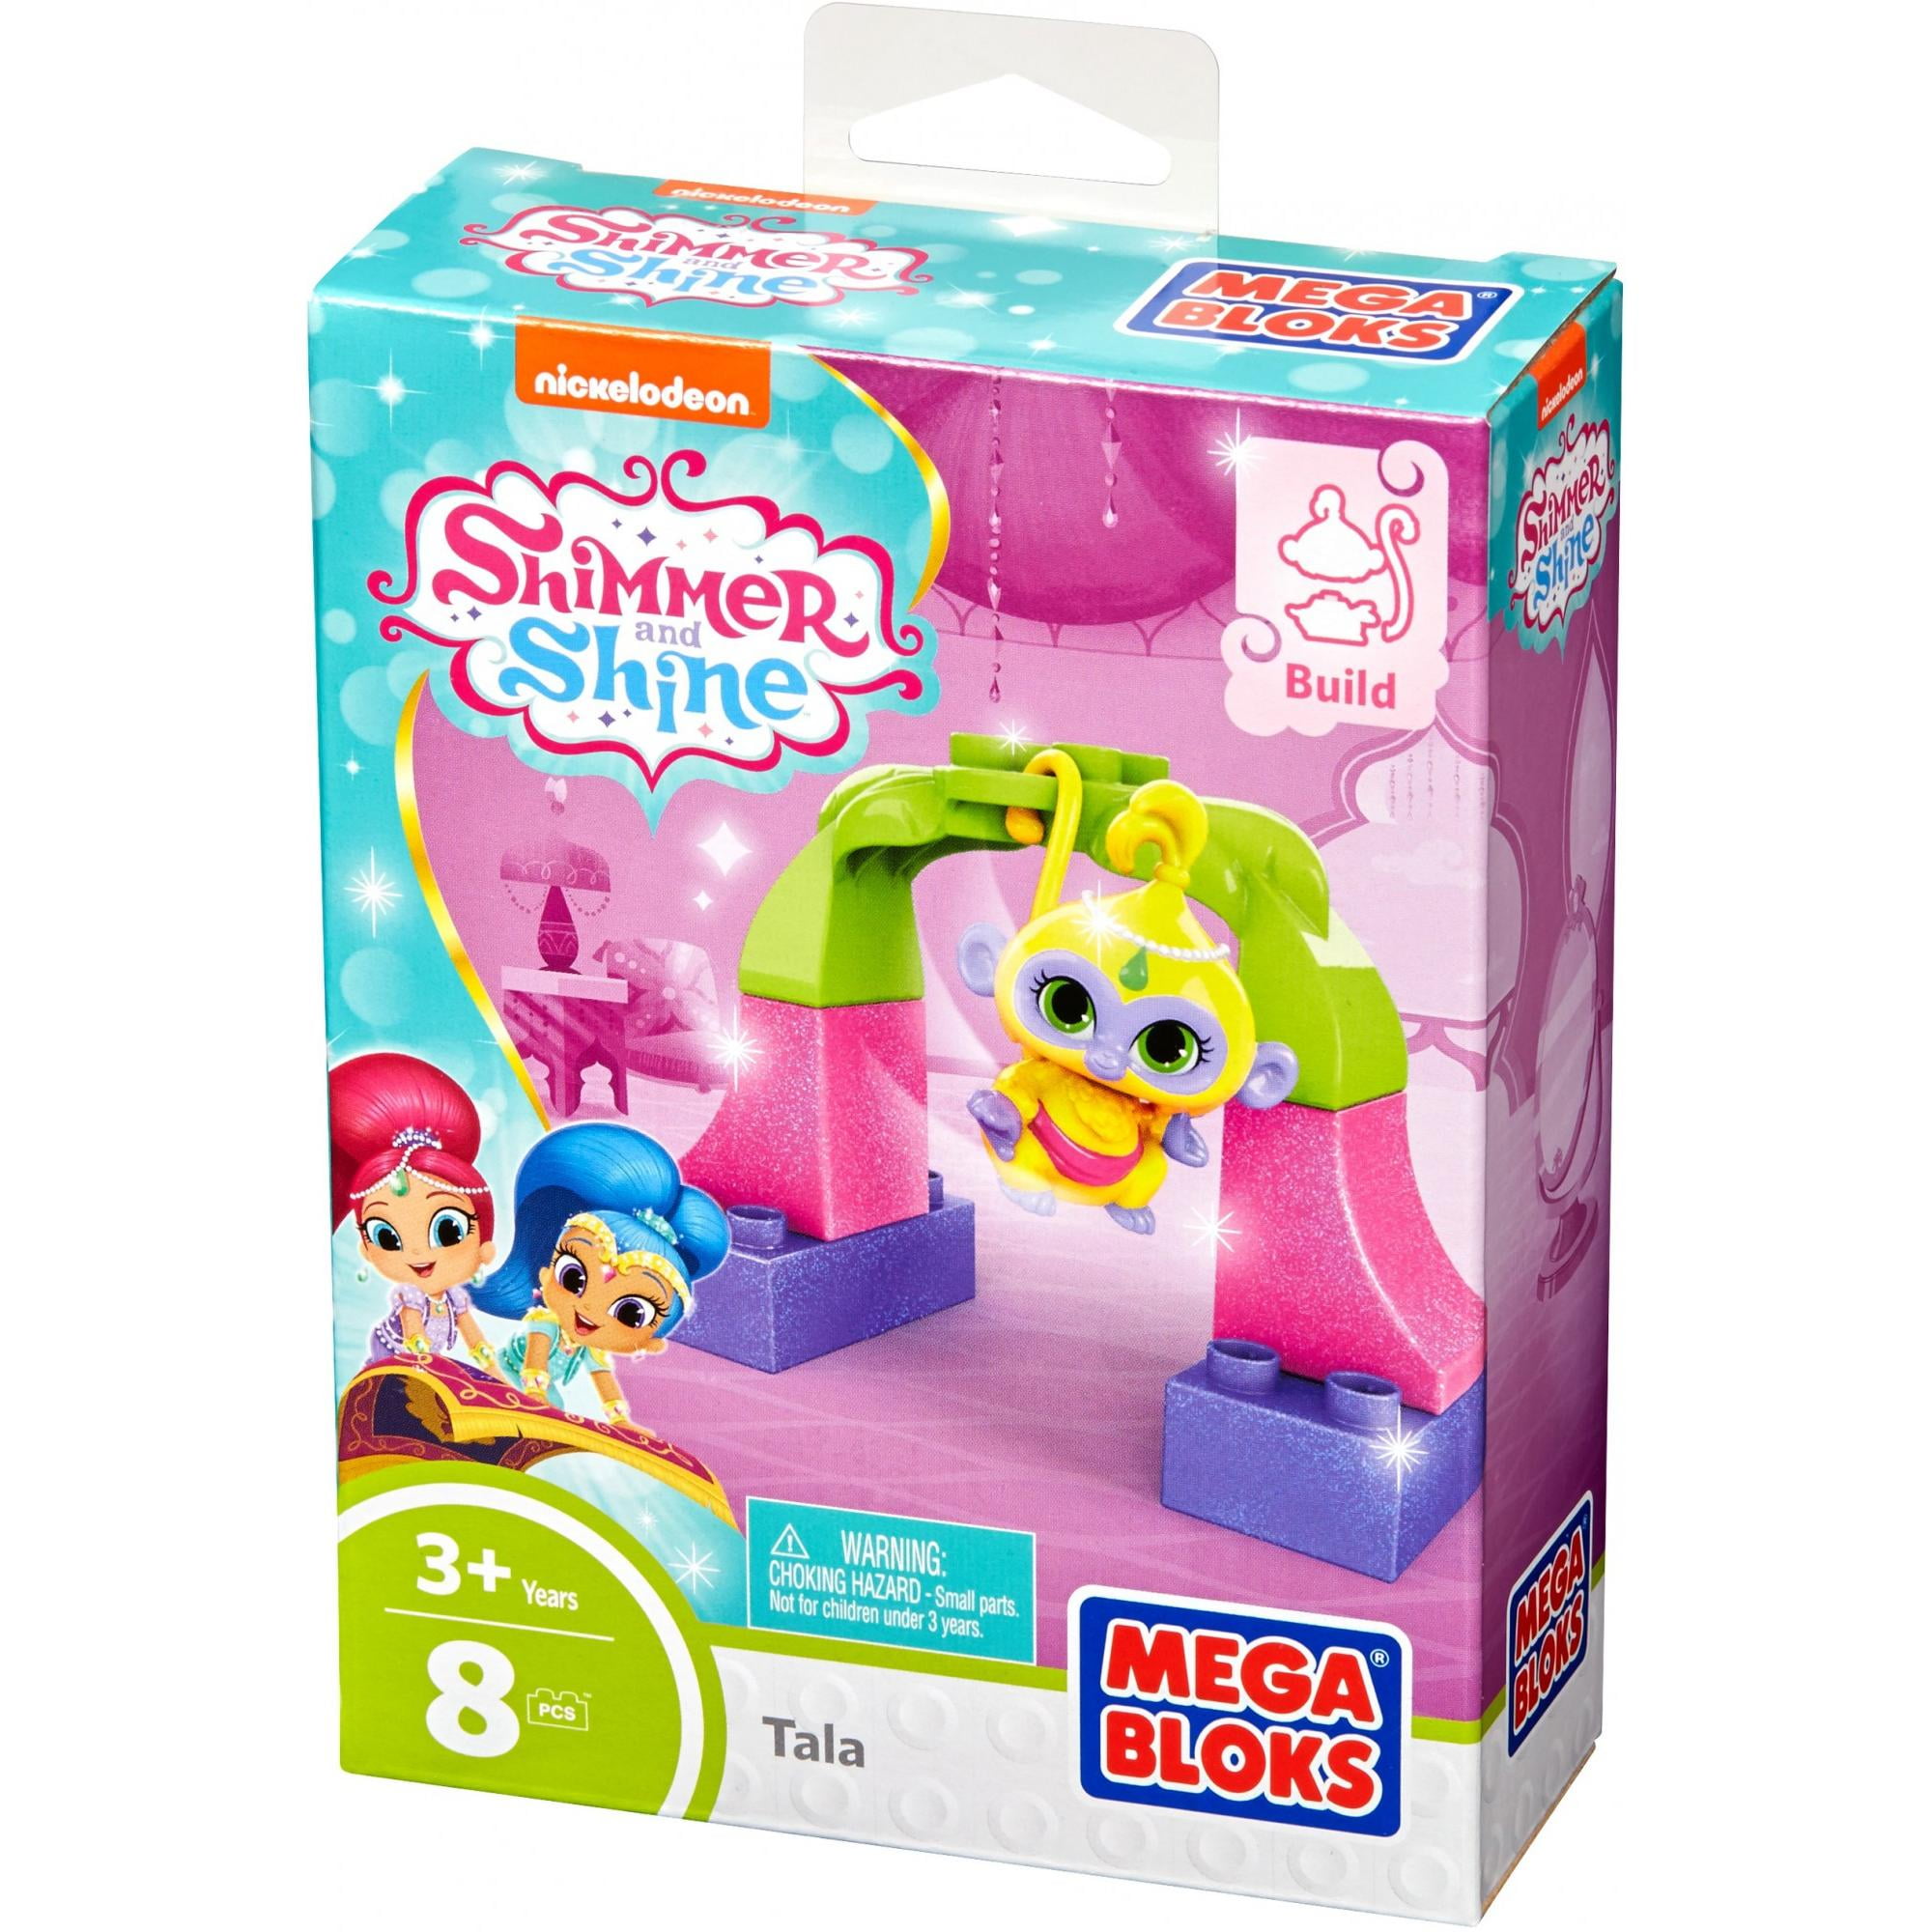 New Mega Bloks Shimmer and Shine Building Playsets w/ Figures Official 